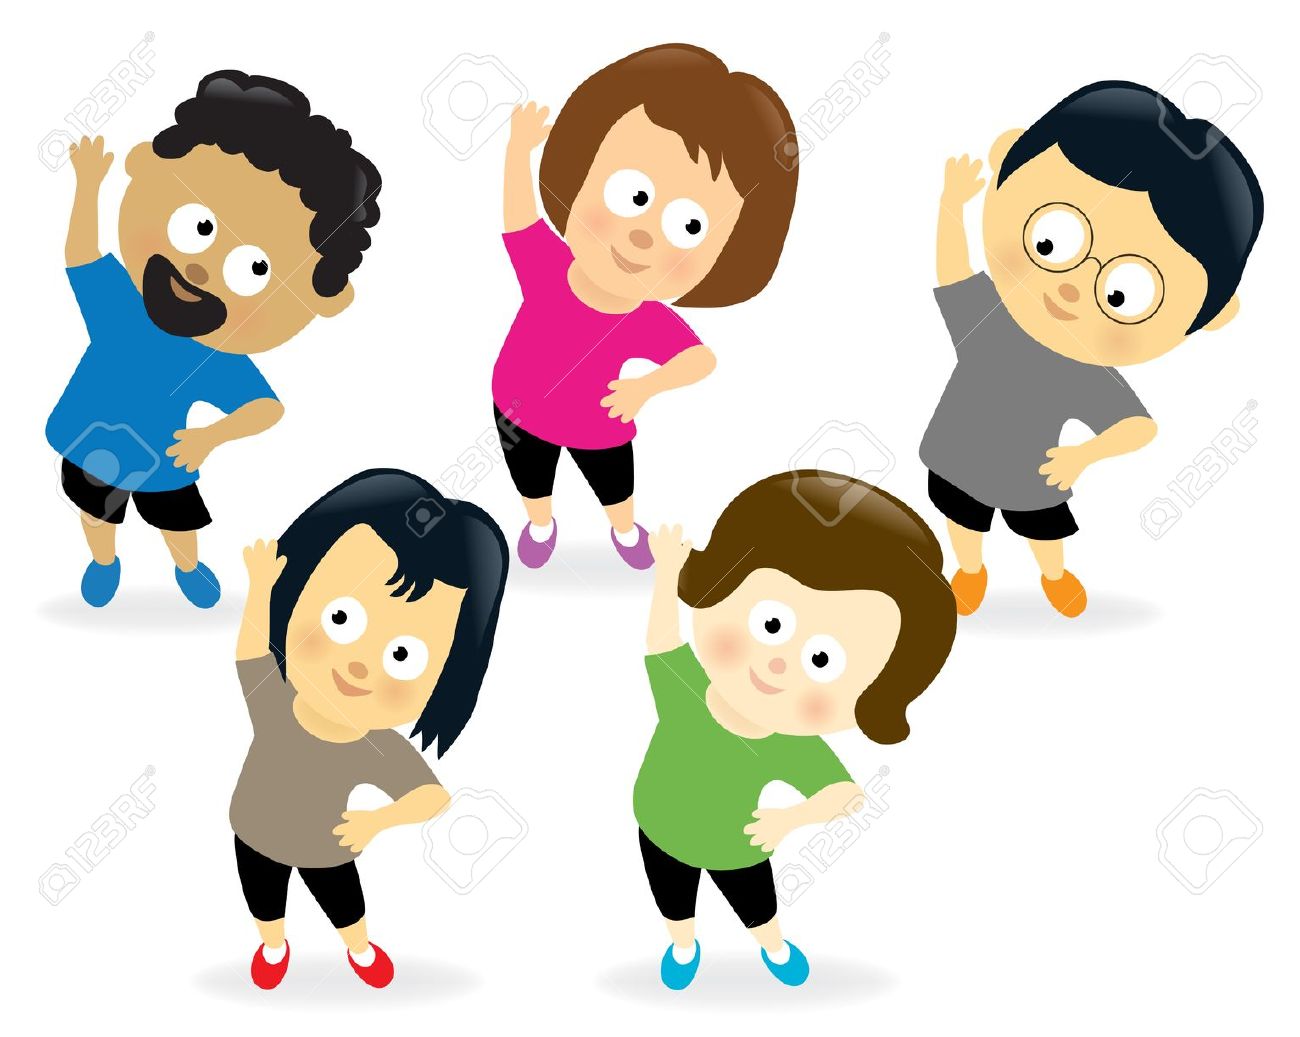 exercise clipart - Exercise Clipart